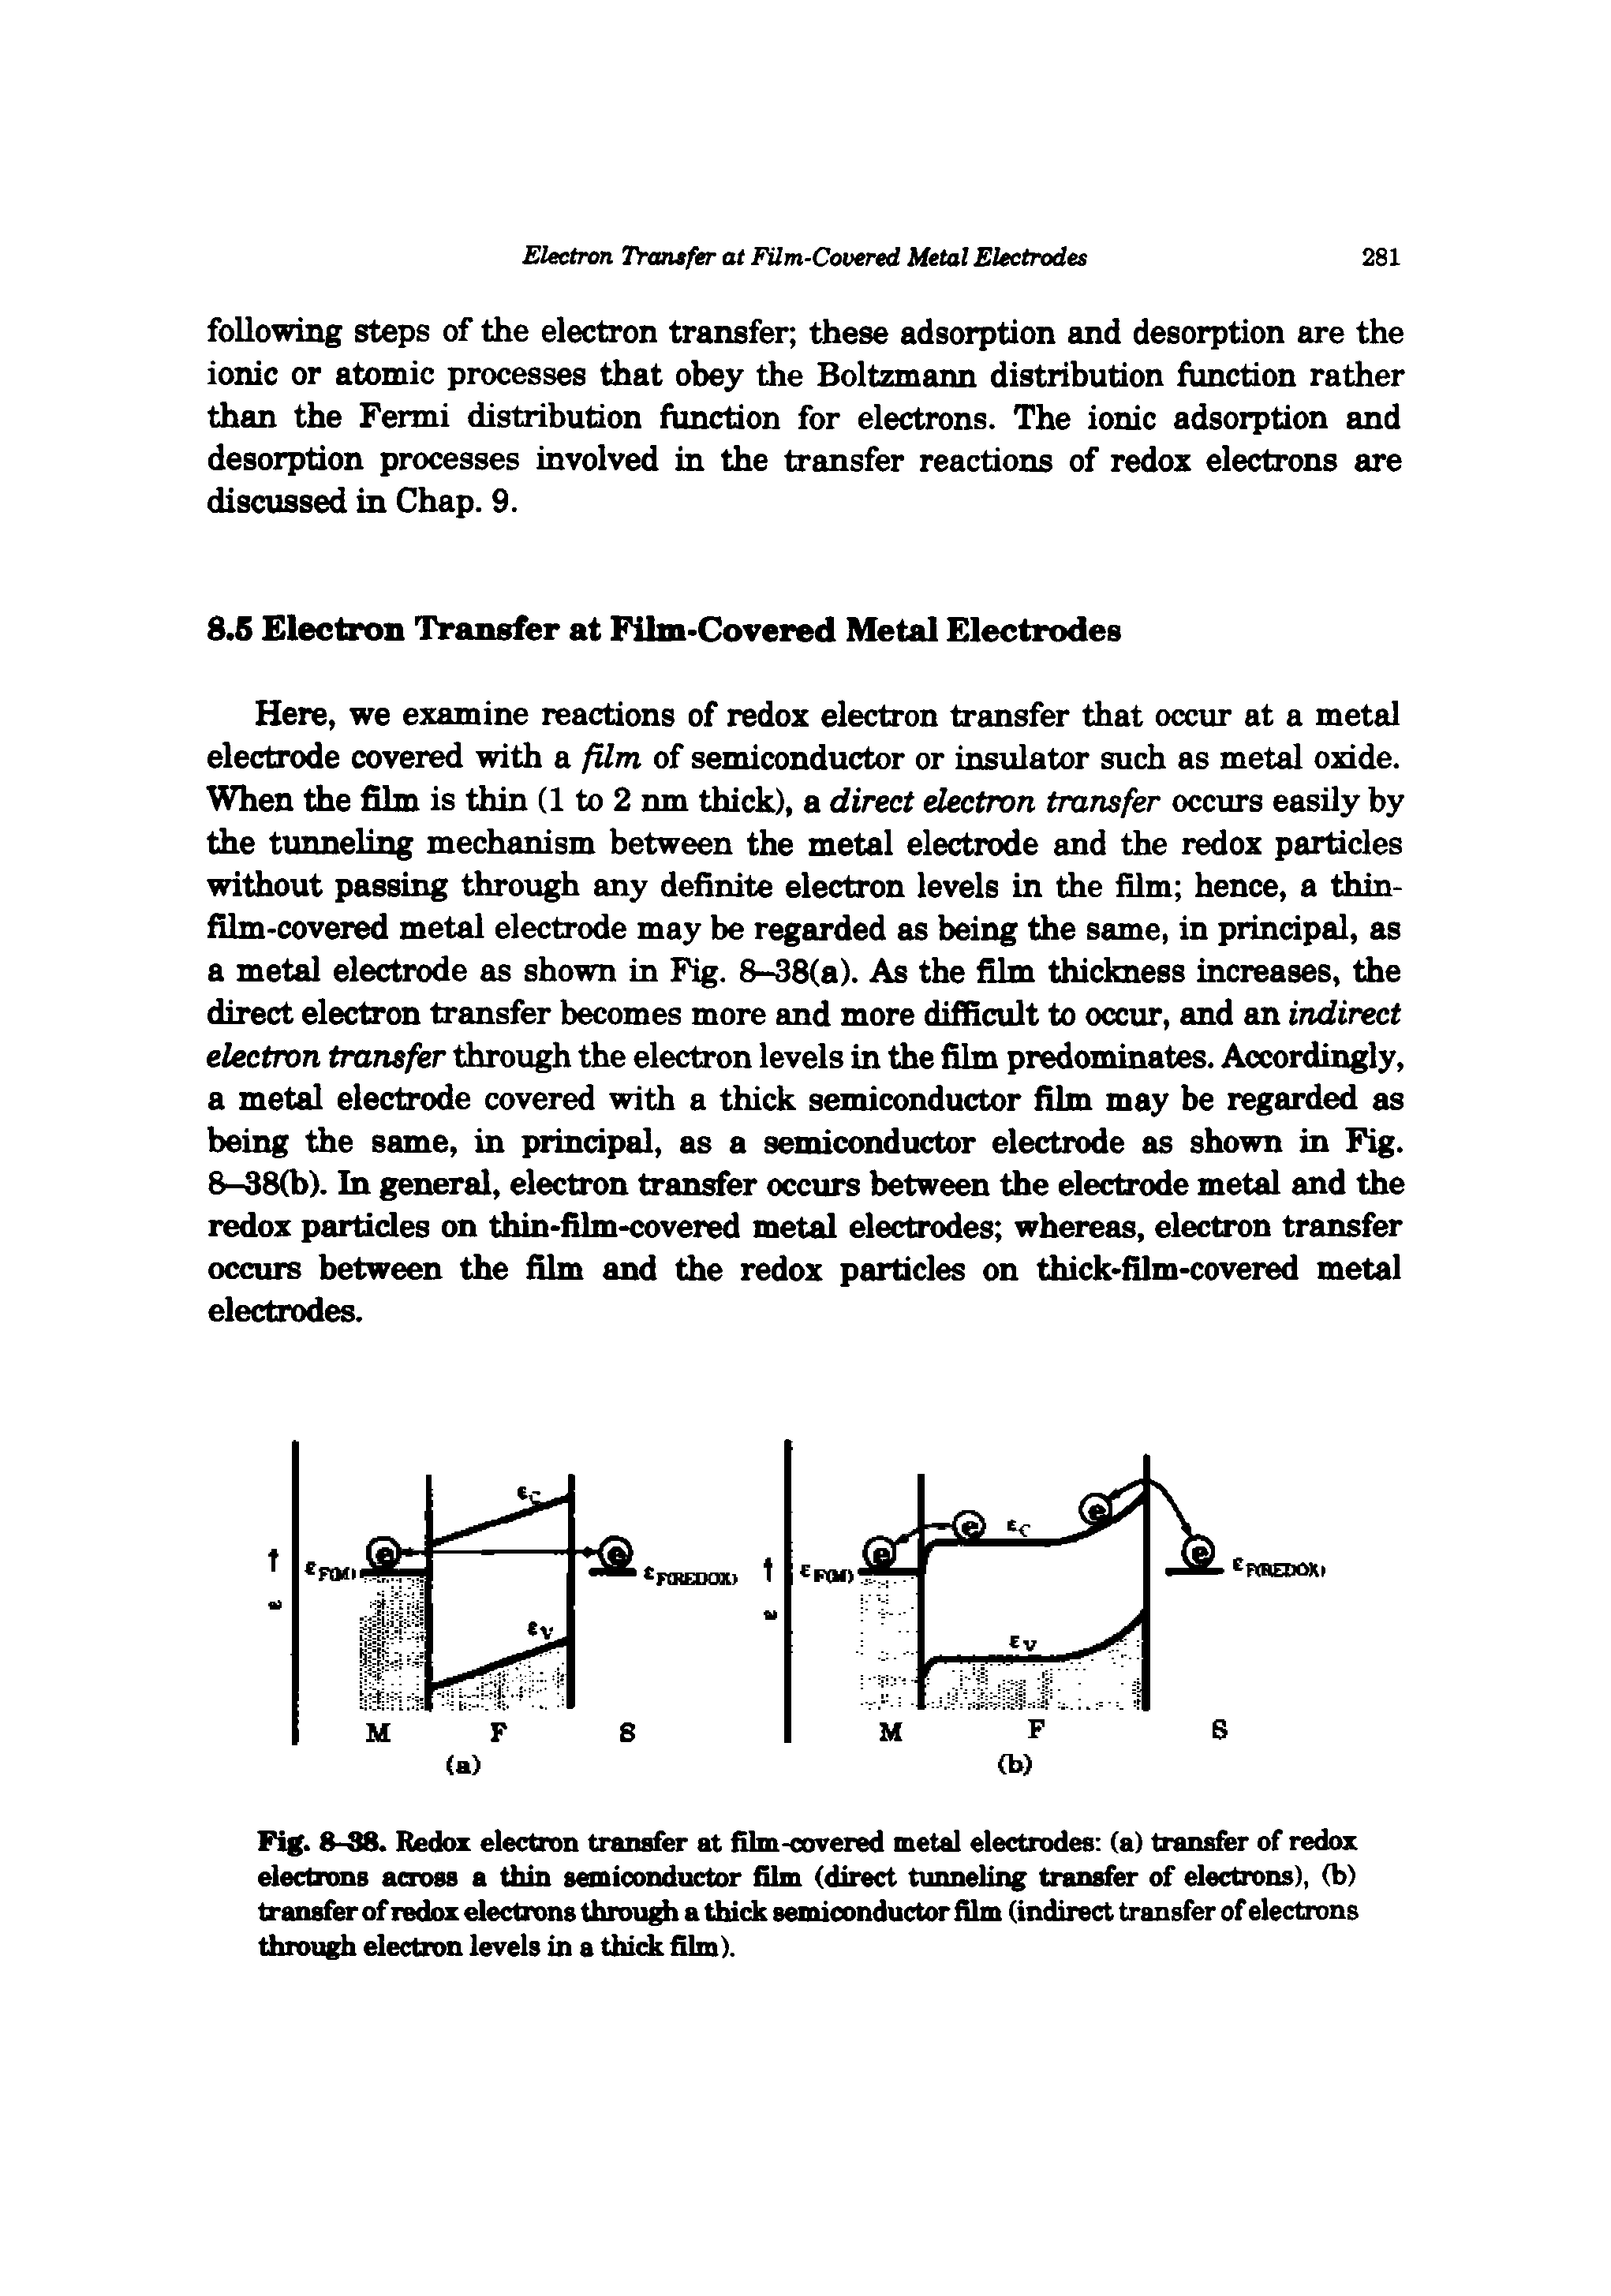 Fig. 8-38. Redox electron transfer at film-covered metal electrodes (a) transfer of redox electionB across a thin semiconductor film (direct tunneling transfer of electrons), (b) transfer of redox elections throu a thidc semiconductor film (indirect transfer of elections through electron levels in a thick film).